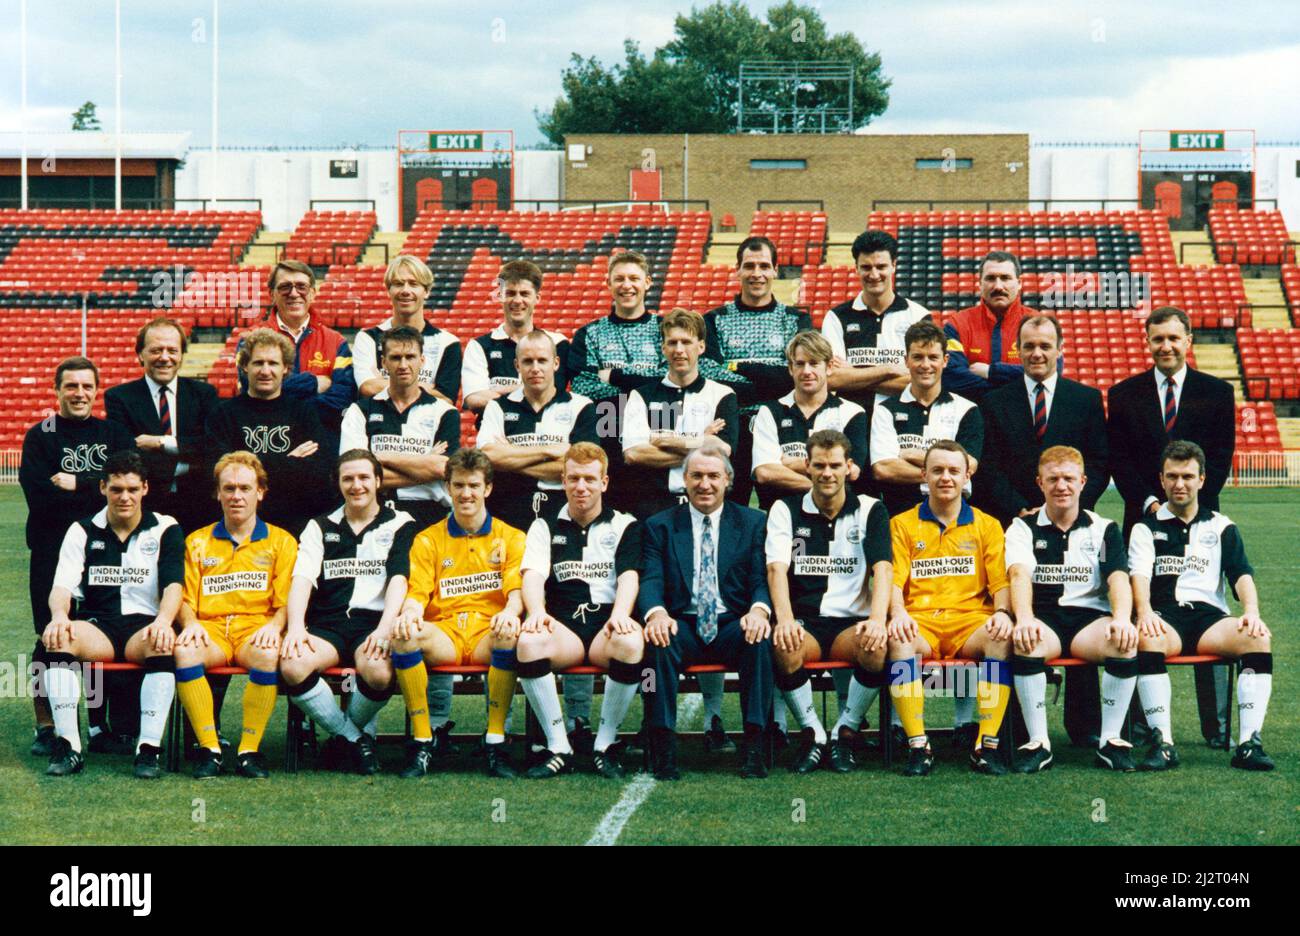 Gateshead team groups 93/94. The team line up for the new Vauxhall conference seasons. Back row; Ian Bruce (kitman), Paul Proudlock, Paul Dobson, Simon Smith, Peter Guthrie, John Borthwick, Trevor Cassidy (assistant physic). Middle Row; Terry Ainsley(physic), John Gibson (chairman), Malcolm Crosby (coach), Keith Nobbs, Ian Dalziel, Steve Higgins, Steve Adams, Michael Farrey, Peter Robinson (director), Jeff Bowron (press officer). Front Row; Brian Rowe, Billy Askew, Darren Nicholls, Lee Payne, David Corner, Tommy Cassidy (manager), Jeff Wrightson, Alan Lamb, Paul Sweeney, Paul Shirtliff. 28th A Stock Photo